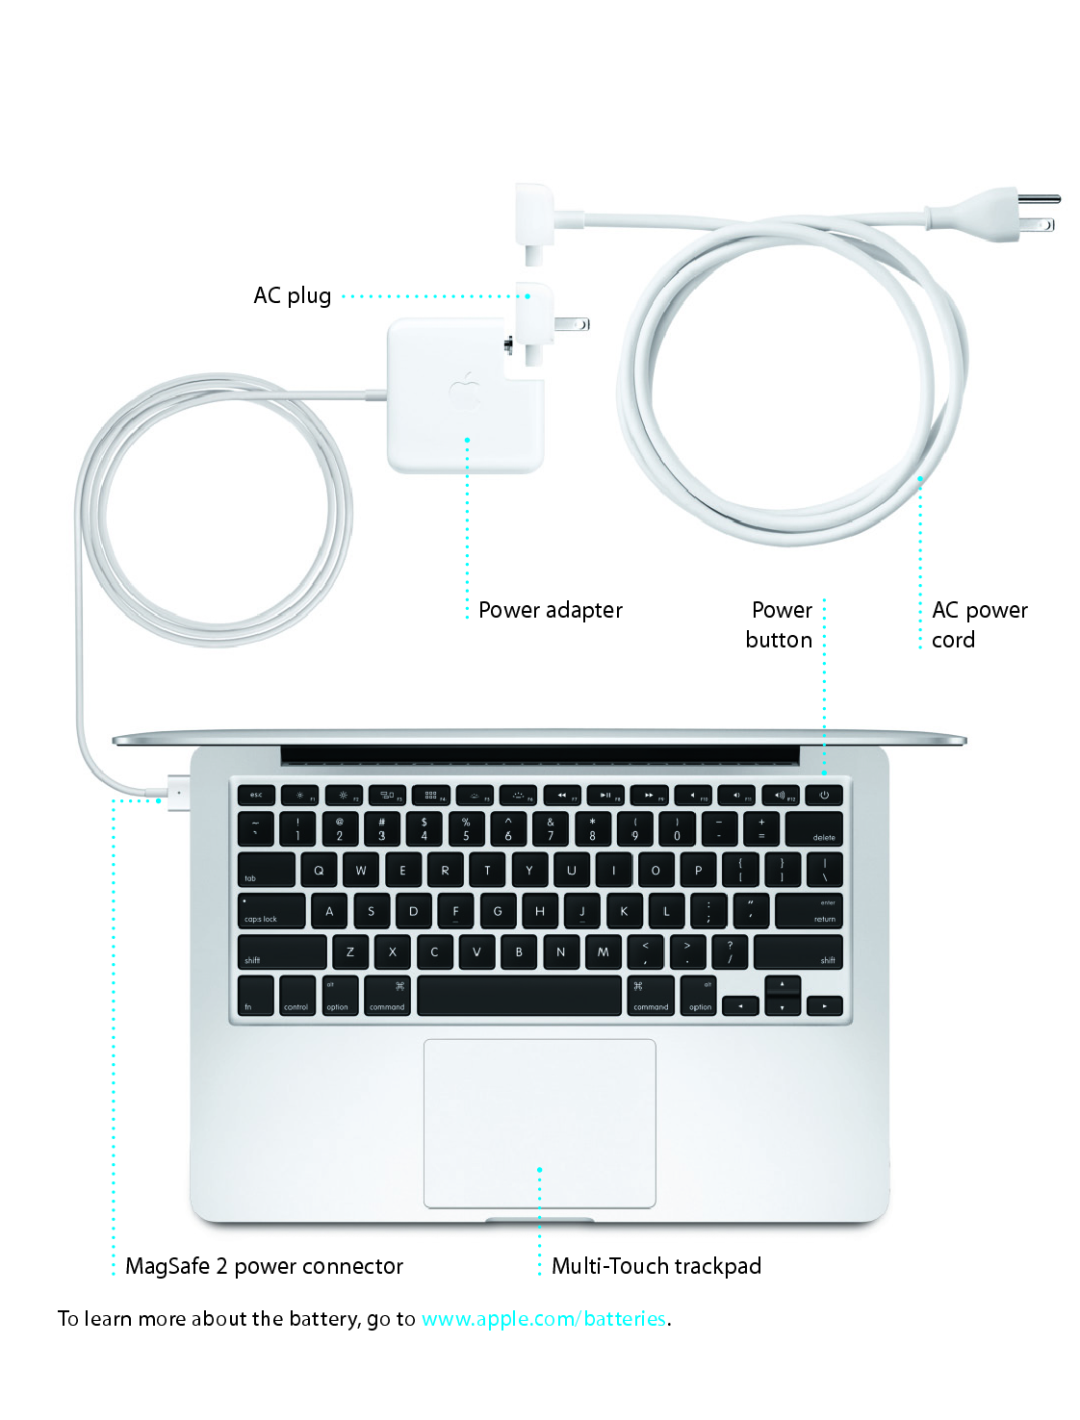 Apple MD212LL/A, ME665LL/A AC plug, Power adapter, button, cord, MagSafe 2 power connector, AC power, Multi-Touch trackpad 